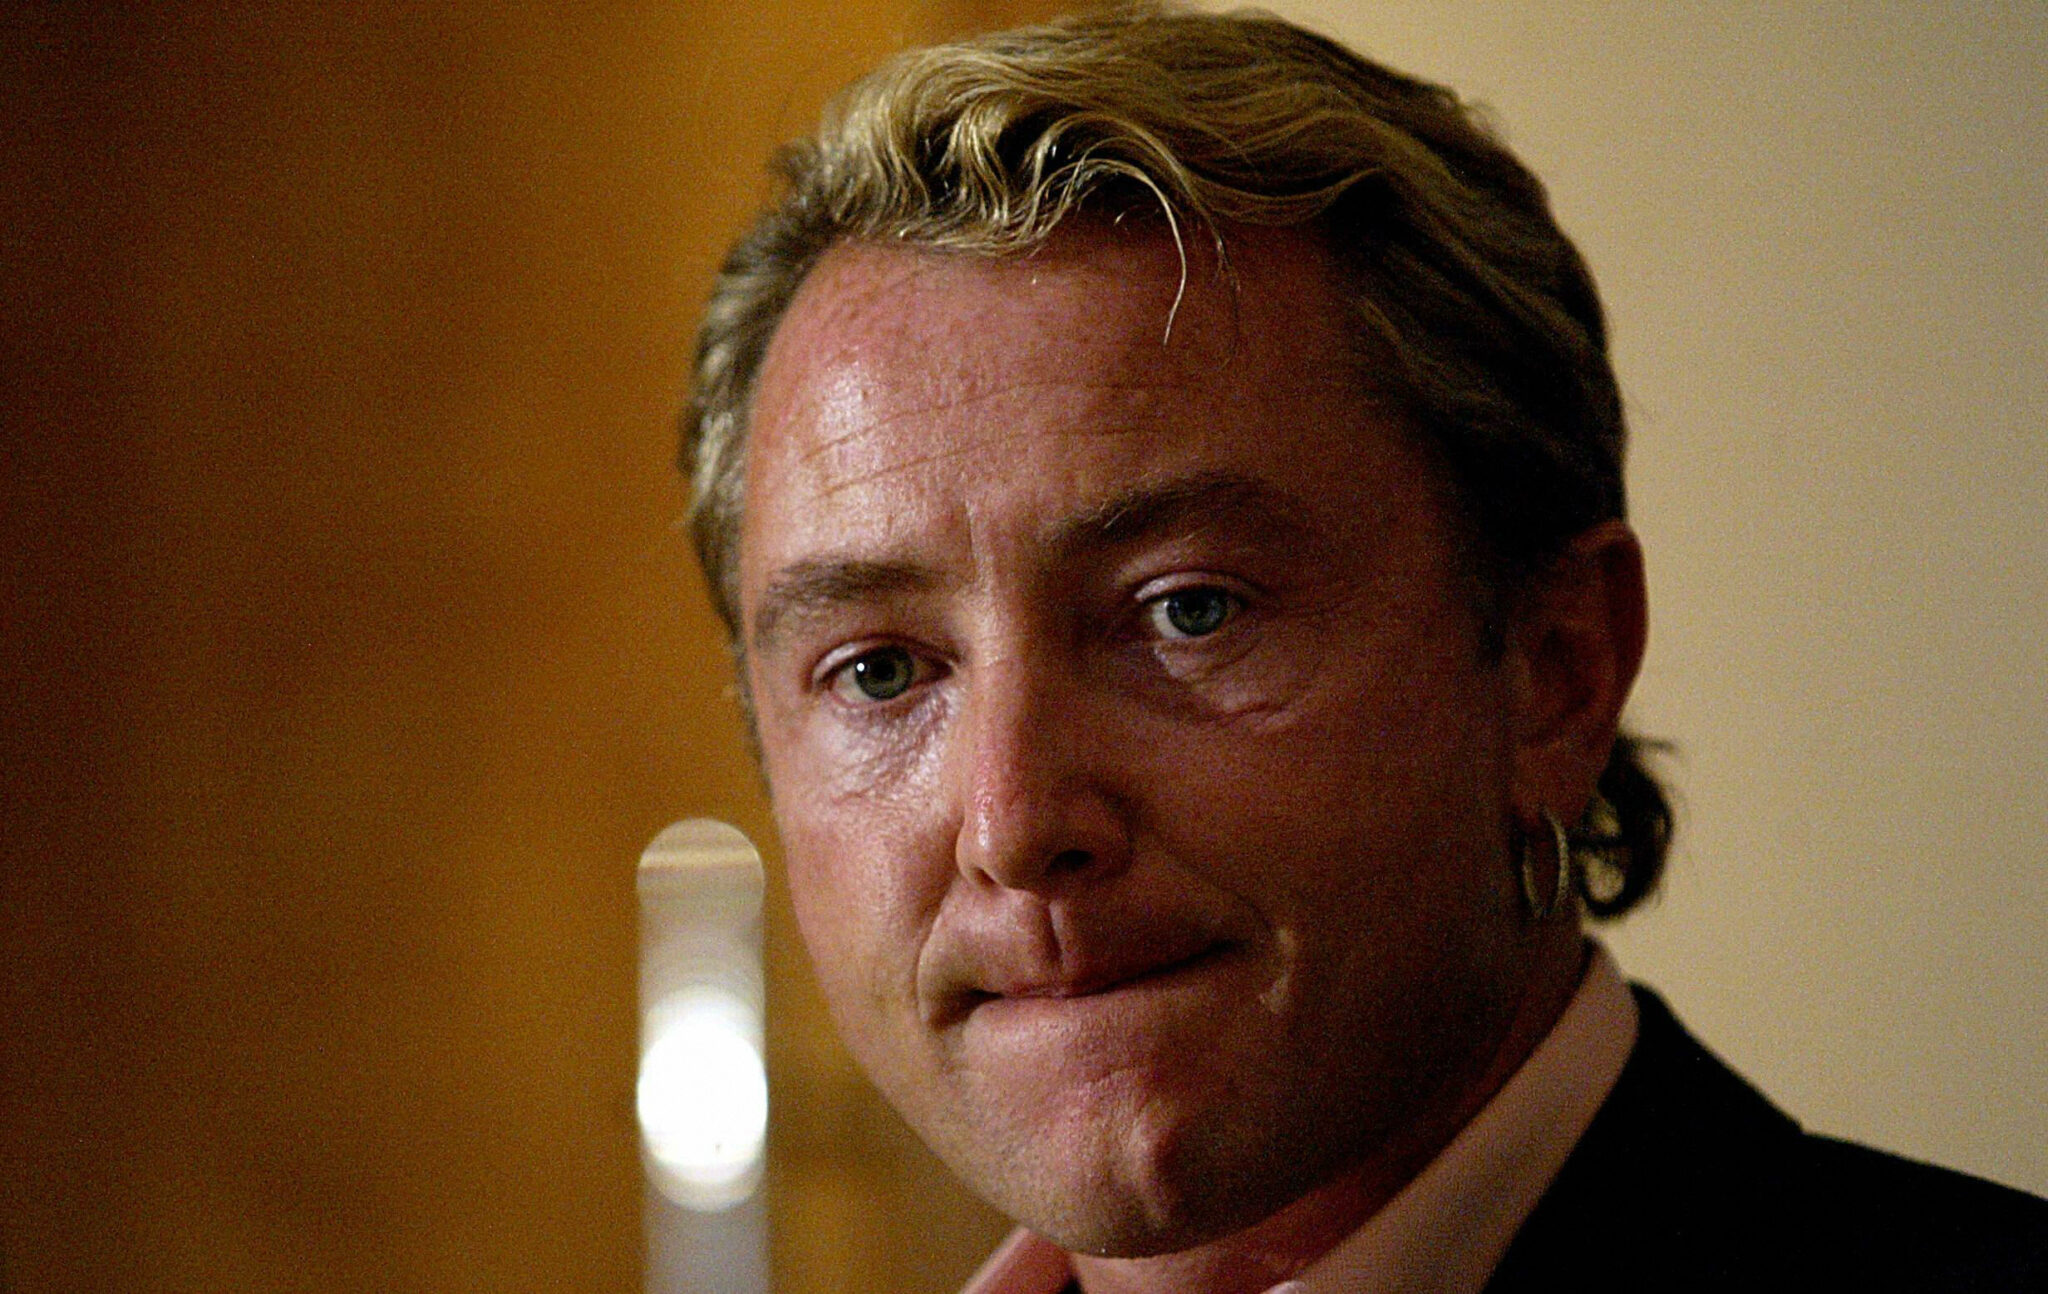 JOHANNESBURG, SOUTH AFRICA:  Founder of Irish company Lord of the Dance, Michael Flatley, addresses a press conference 28 June 204 in Johannesburg, following the murder of one of his company members, Daryl Kempster. Kempster was shot 26 June night as he was returning from the Civic Theatre to the nearby Parktonian Hotel in the business district of Johannesburg, where the cast and crew were staying.  . AFP PHOTO /Alexander Joe  (Photo credit should read ALEXANDER JOE/AFP via Getty Images)